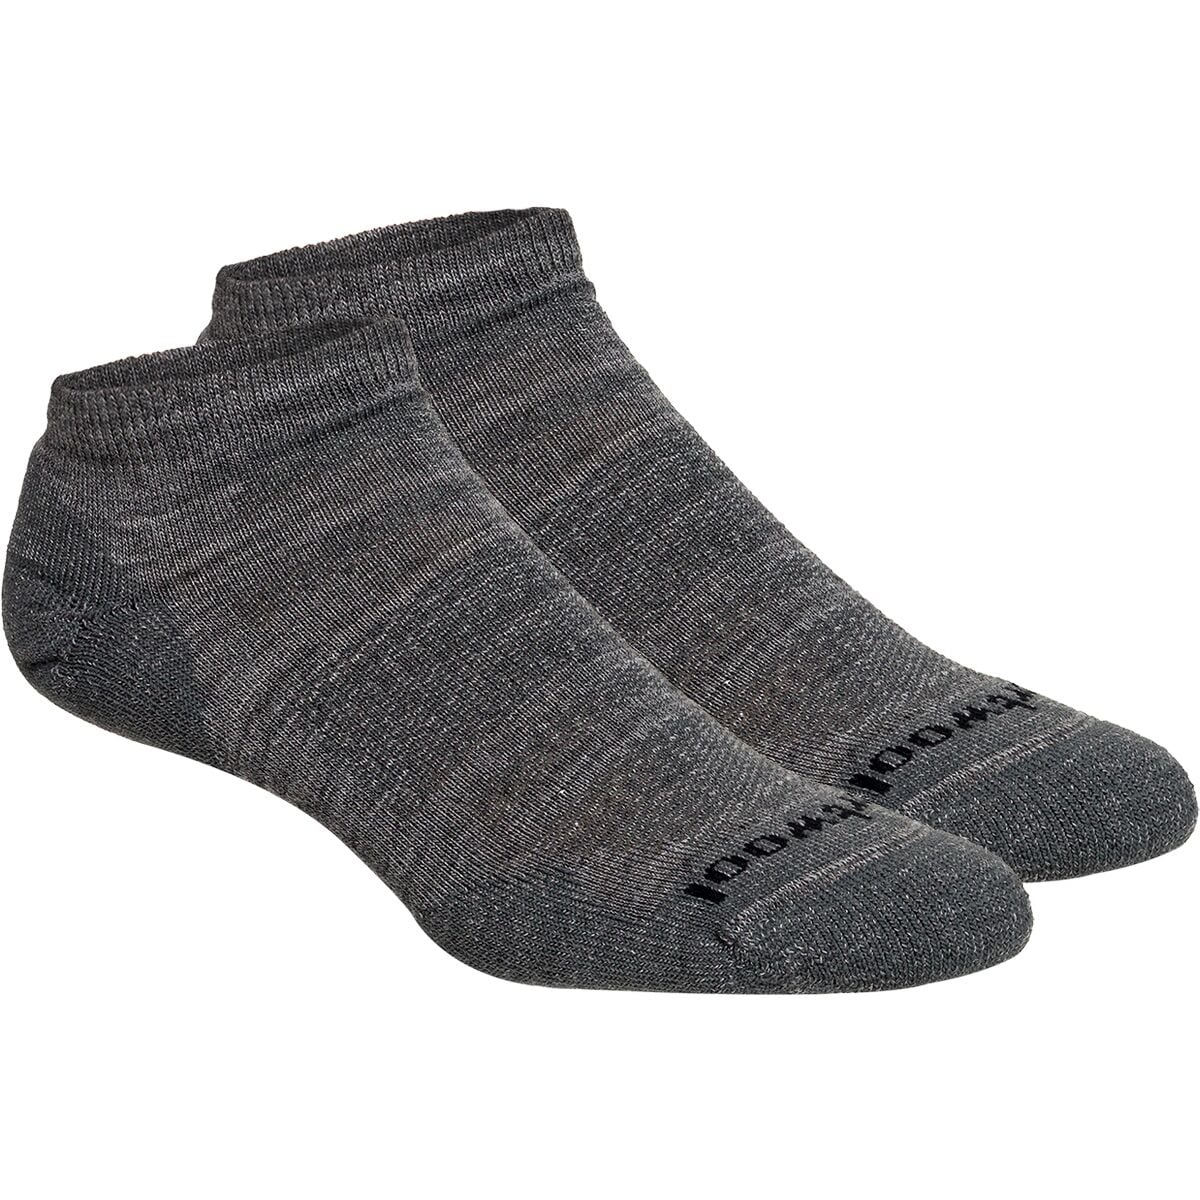 Smartwool Athletic Targeted Cushion Low Ankle Sock - 2-Pack - Men's